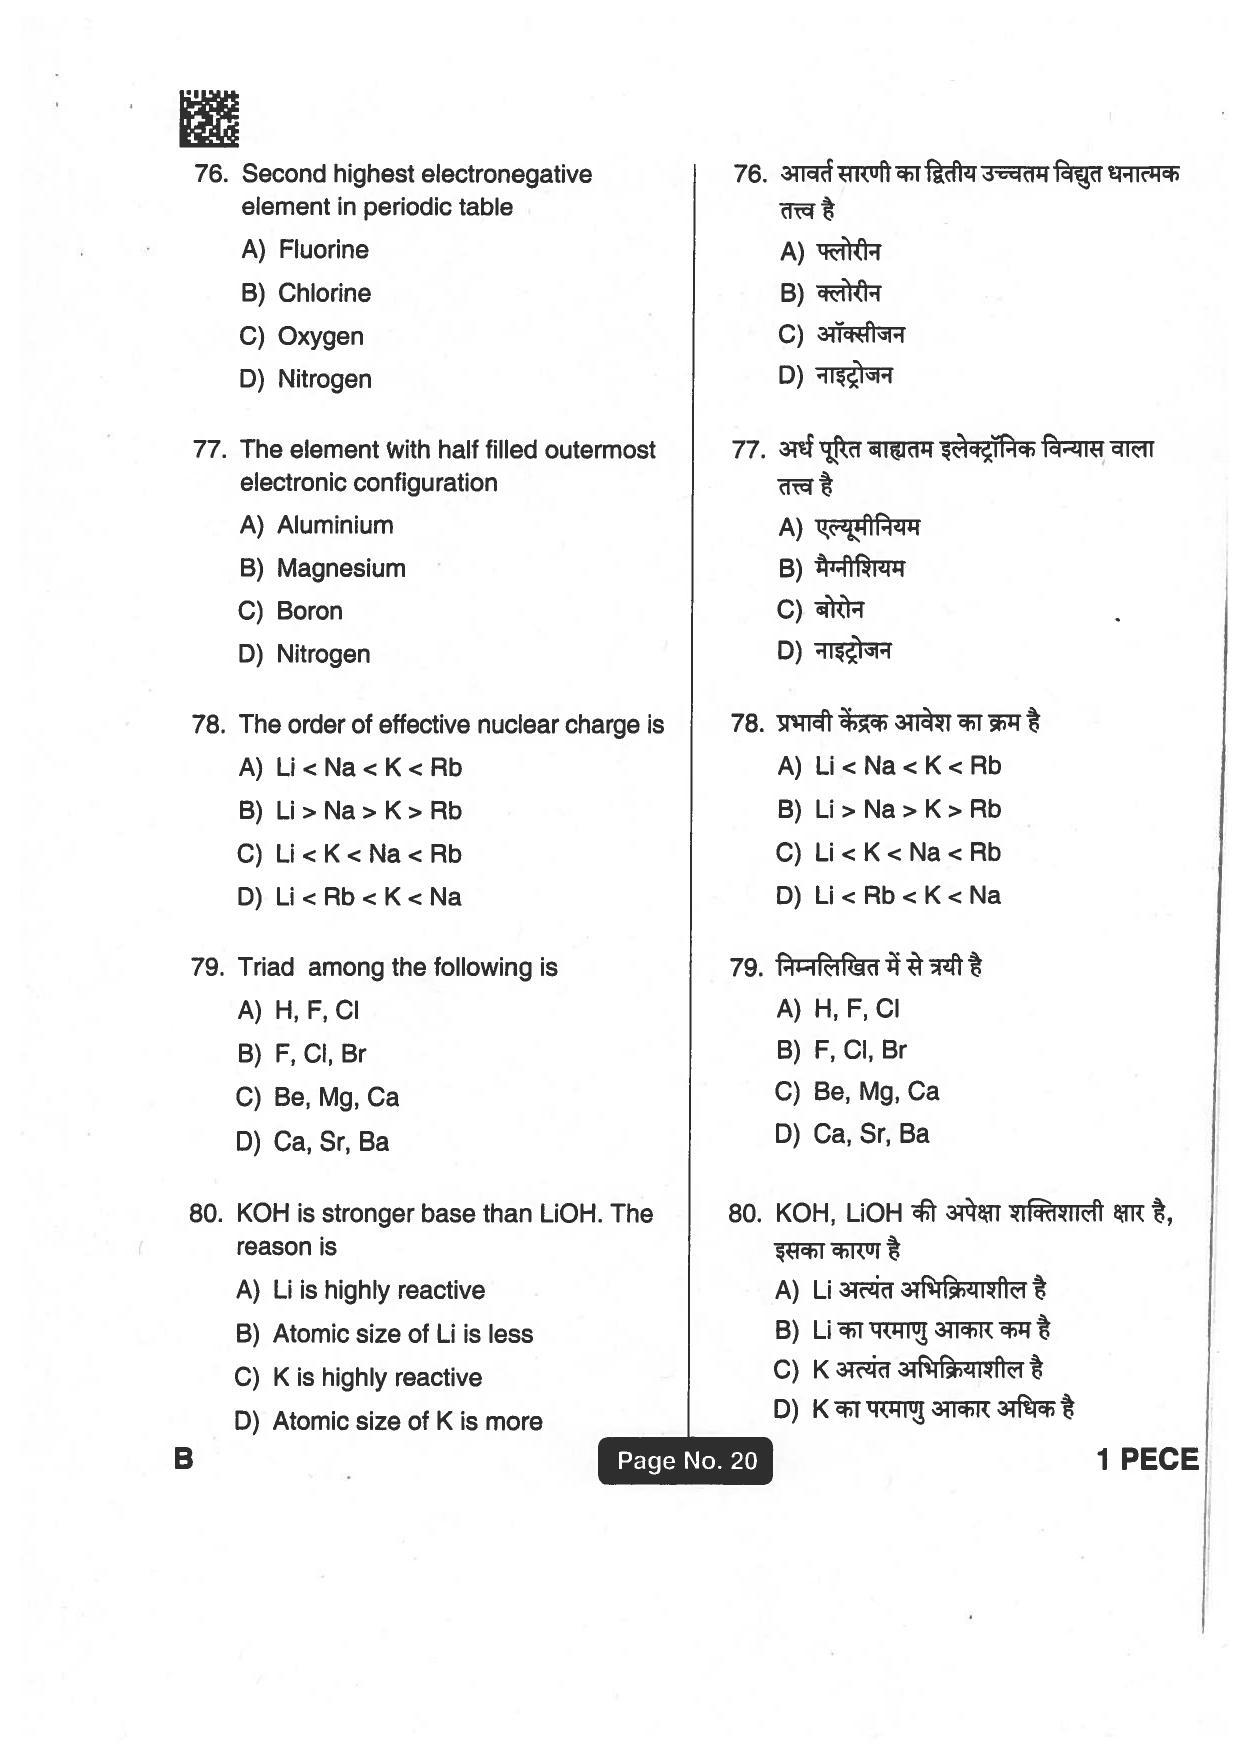 Jharkhand Polytechnic SET B 2018 Question Paper with Answers - Page 19